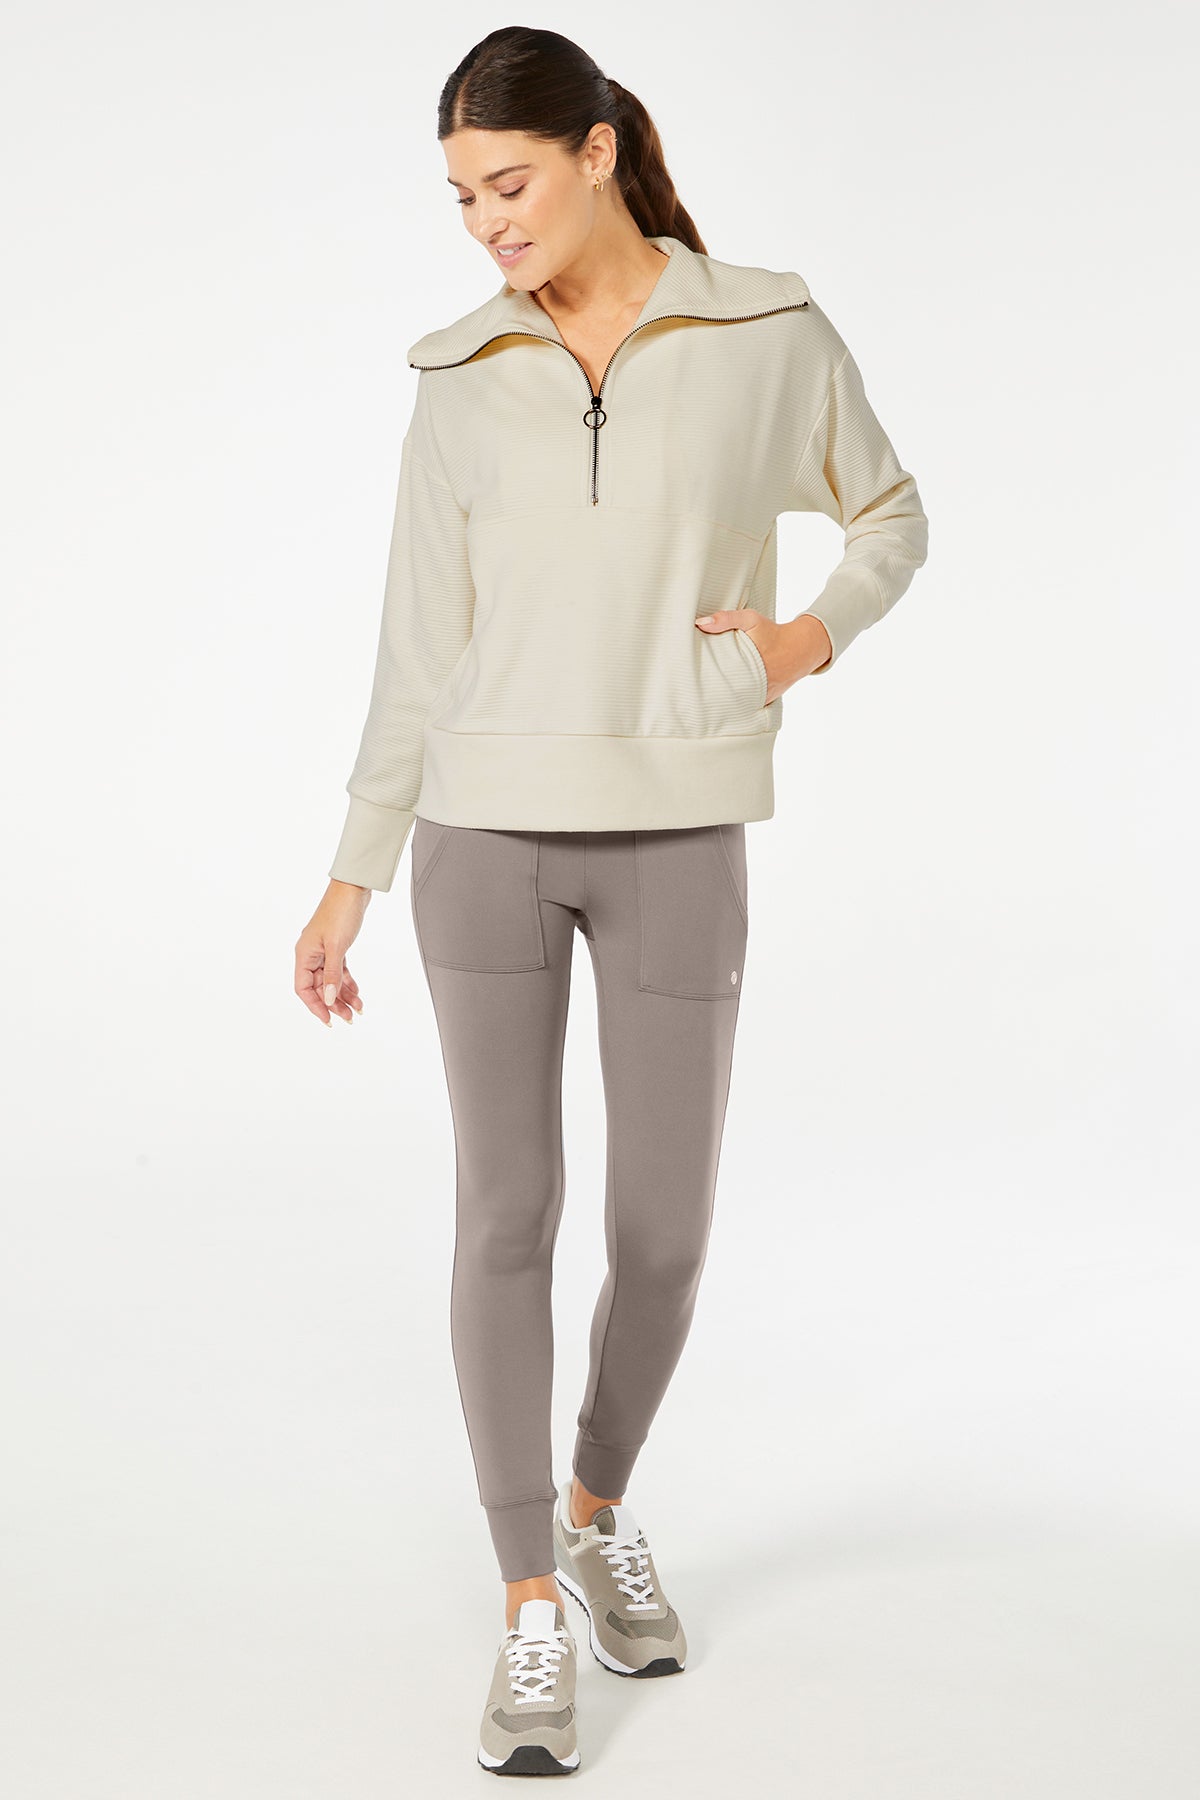 Lululemon Twist Back to Front Pullover - Stylish and Functional